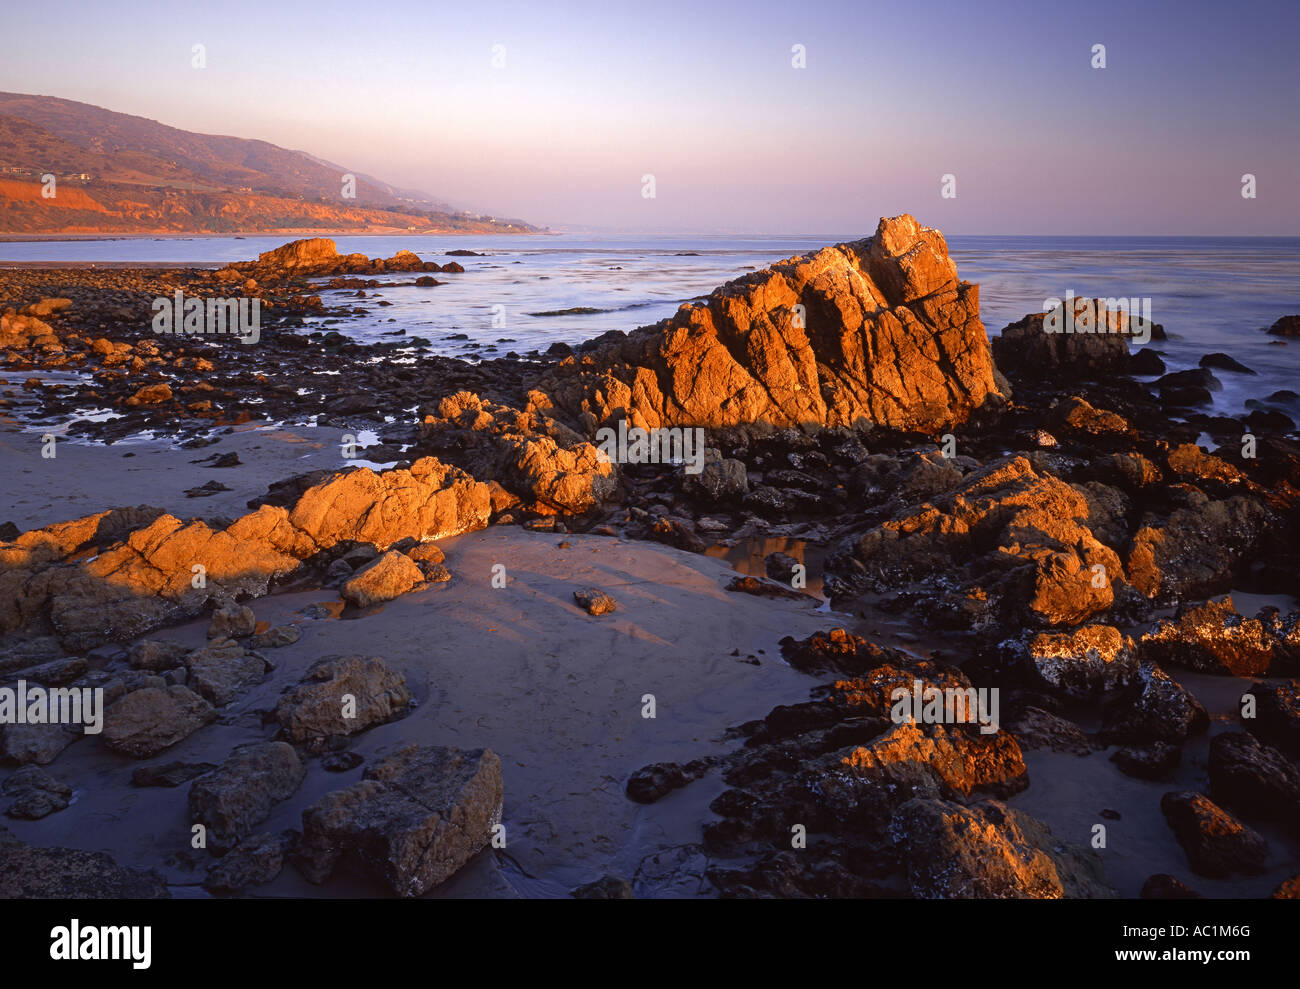 Leo Carrillo State Beach Malibu Los Angeles County California United States Banque D'Images